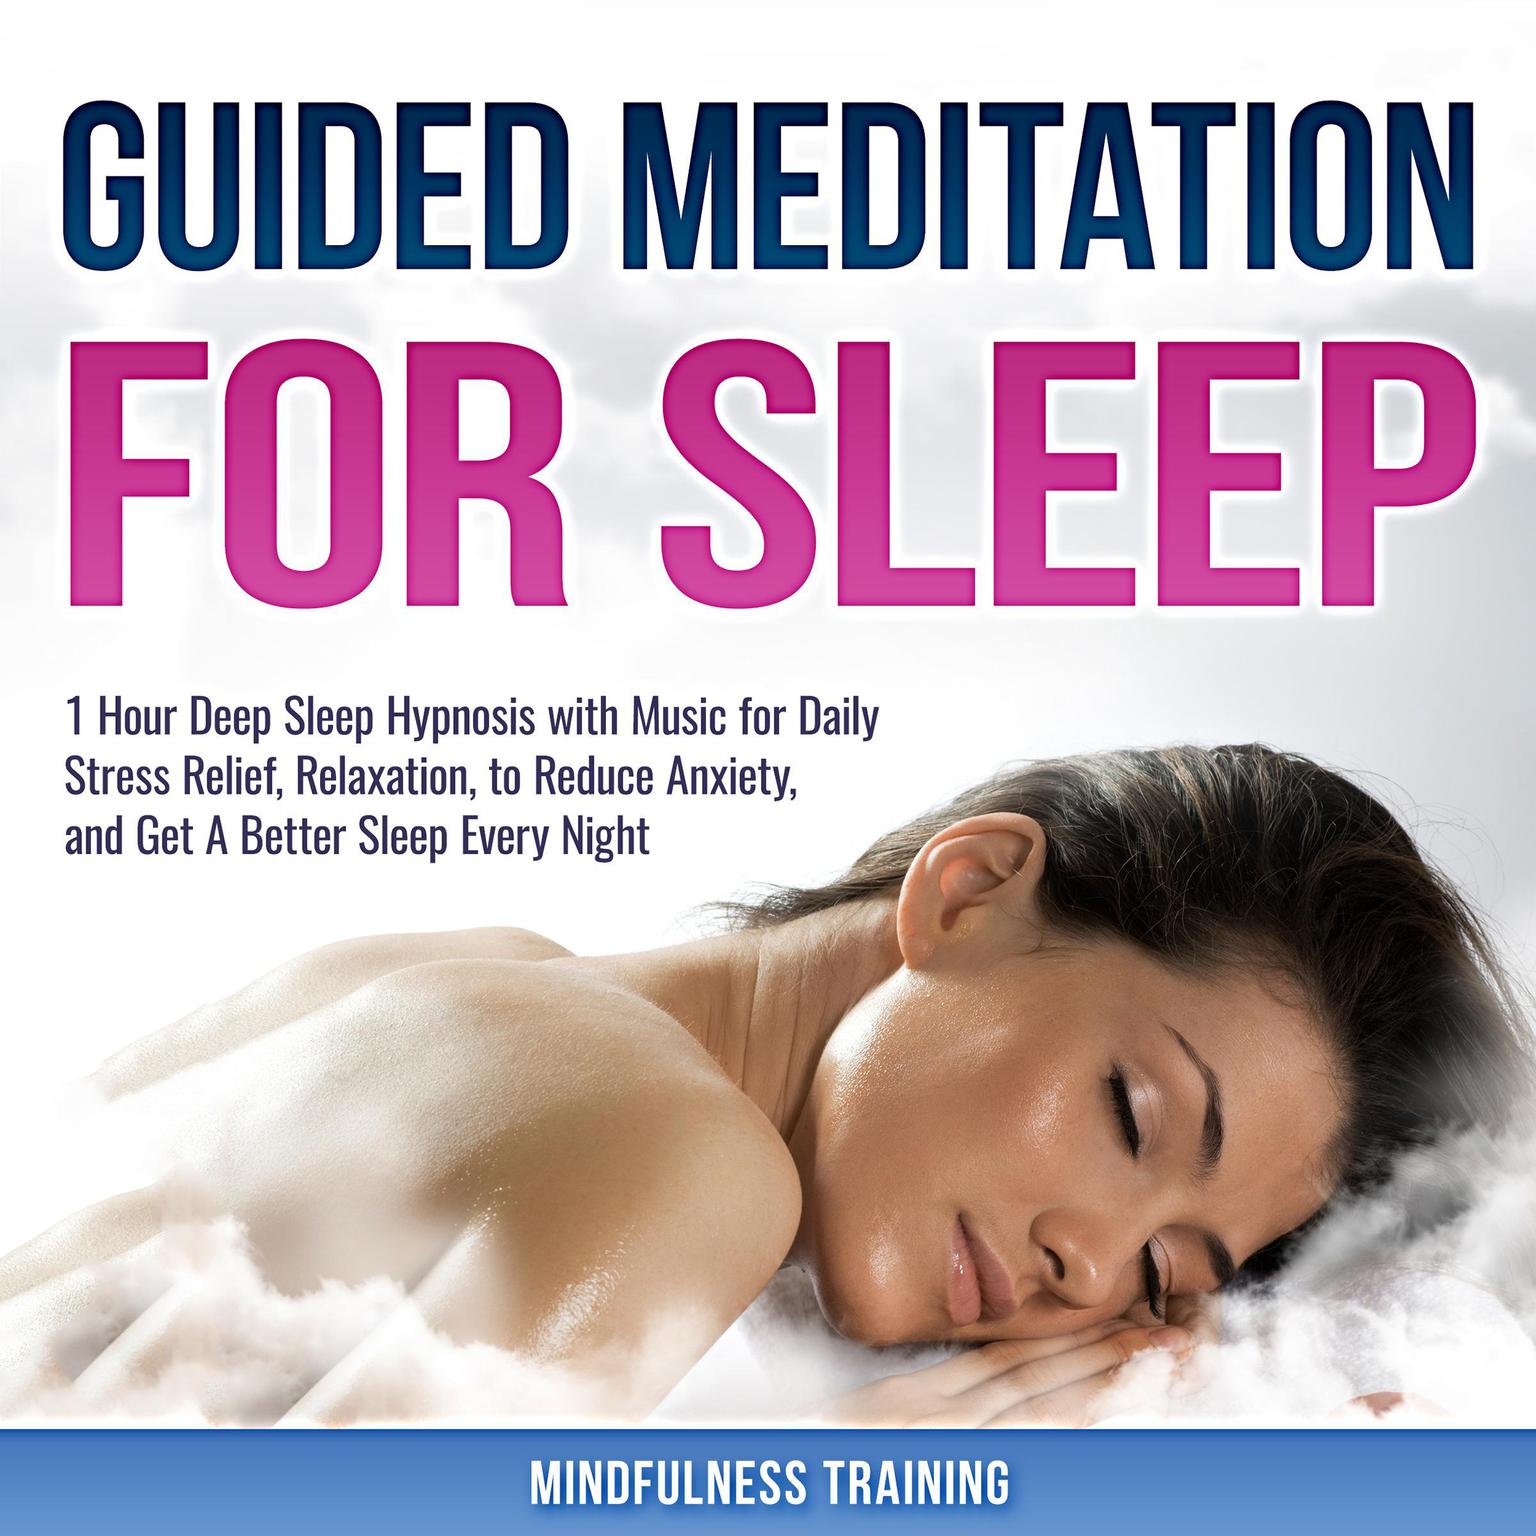 Guided Meditation for Sleep: 1 Hour Deep Sleep Hypnosis with Music for Daily Stress Relief, Relaxation, to Reduce Anxiety, and Get A Better Sleep Every Night (Deep Sleep Hypnosis & Relaxation Series): Guided Meditation for Stress Relief, Relaxation, & Falling Asleep Fast Audiobook, by Mindfulness Training